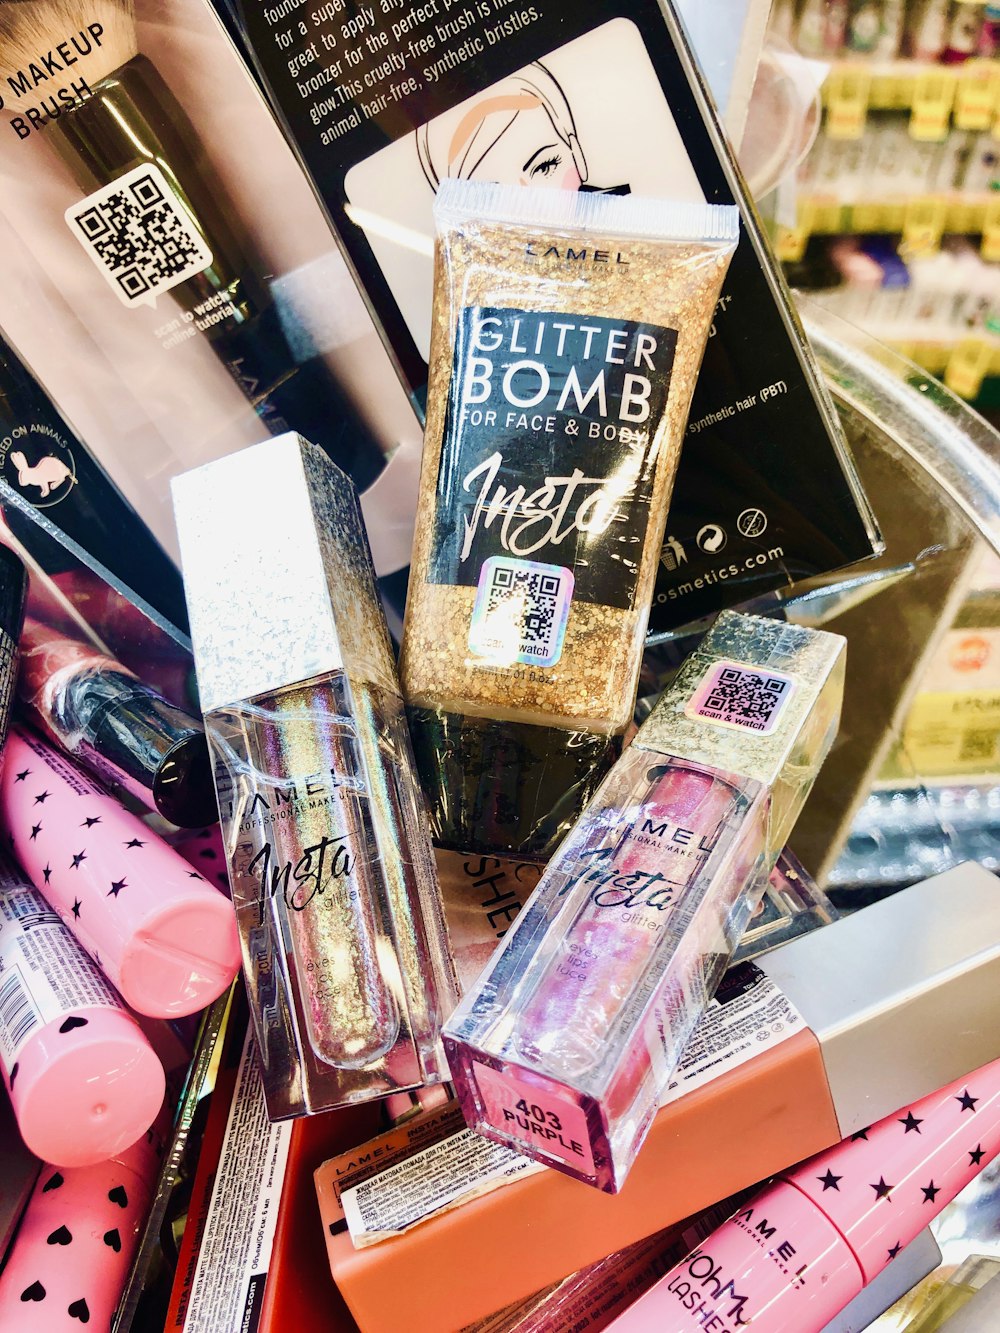 a pile of cosmetics and other items on a table